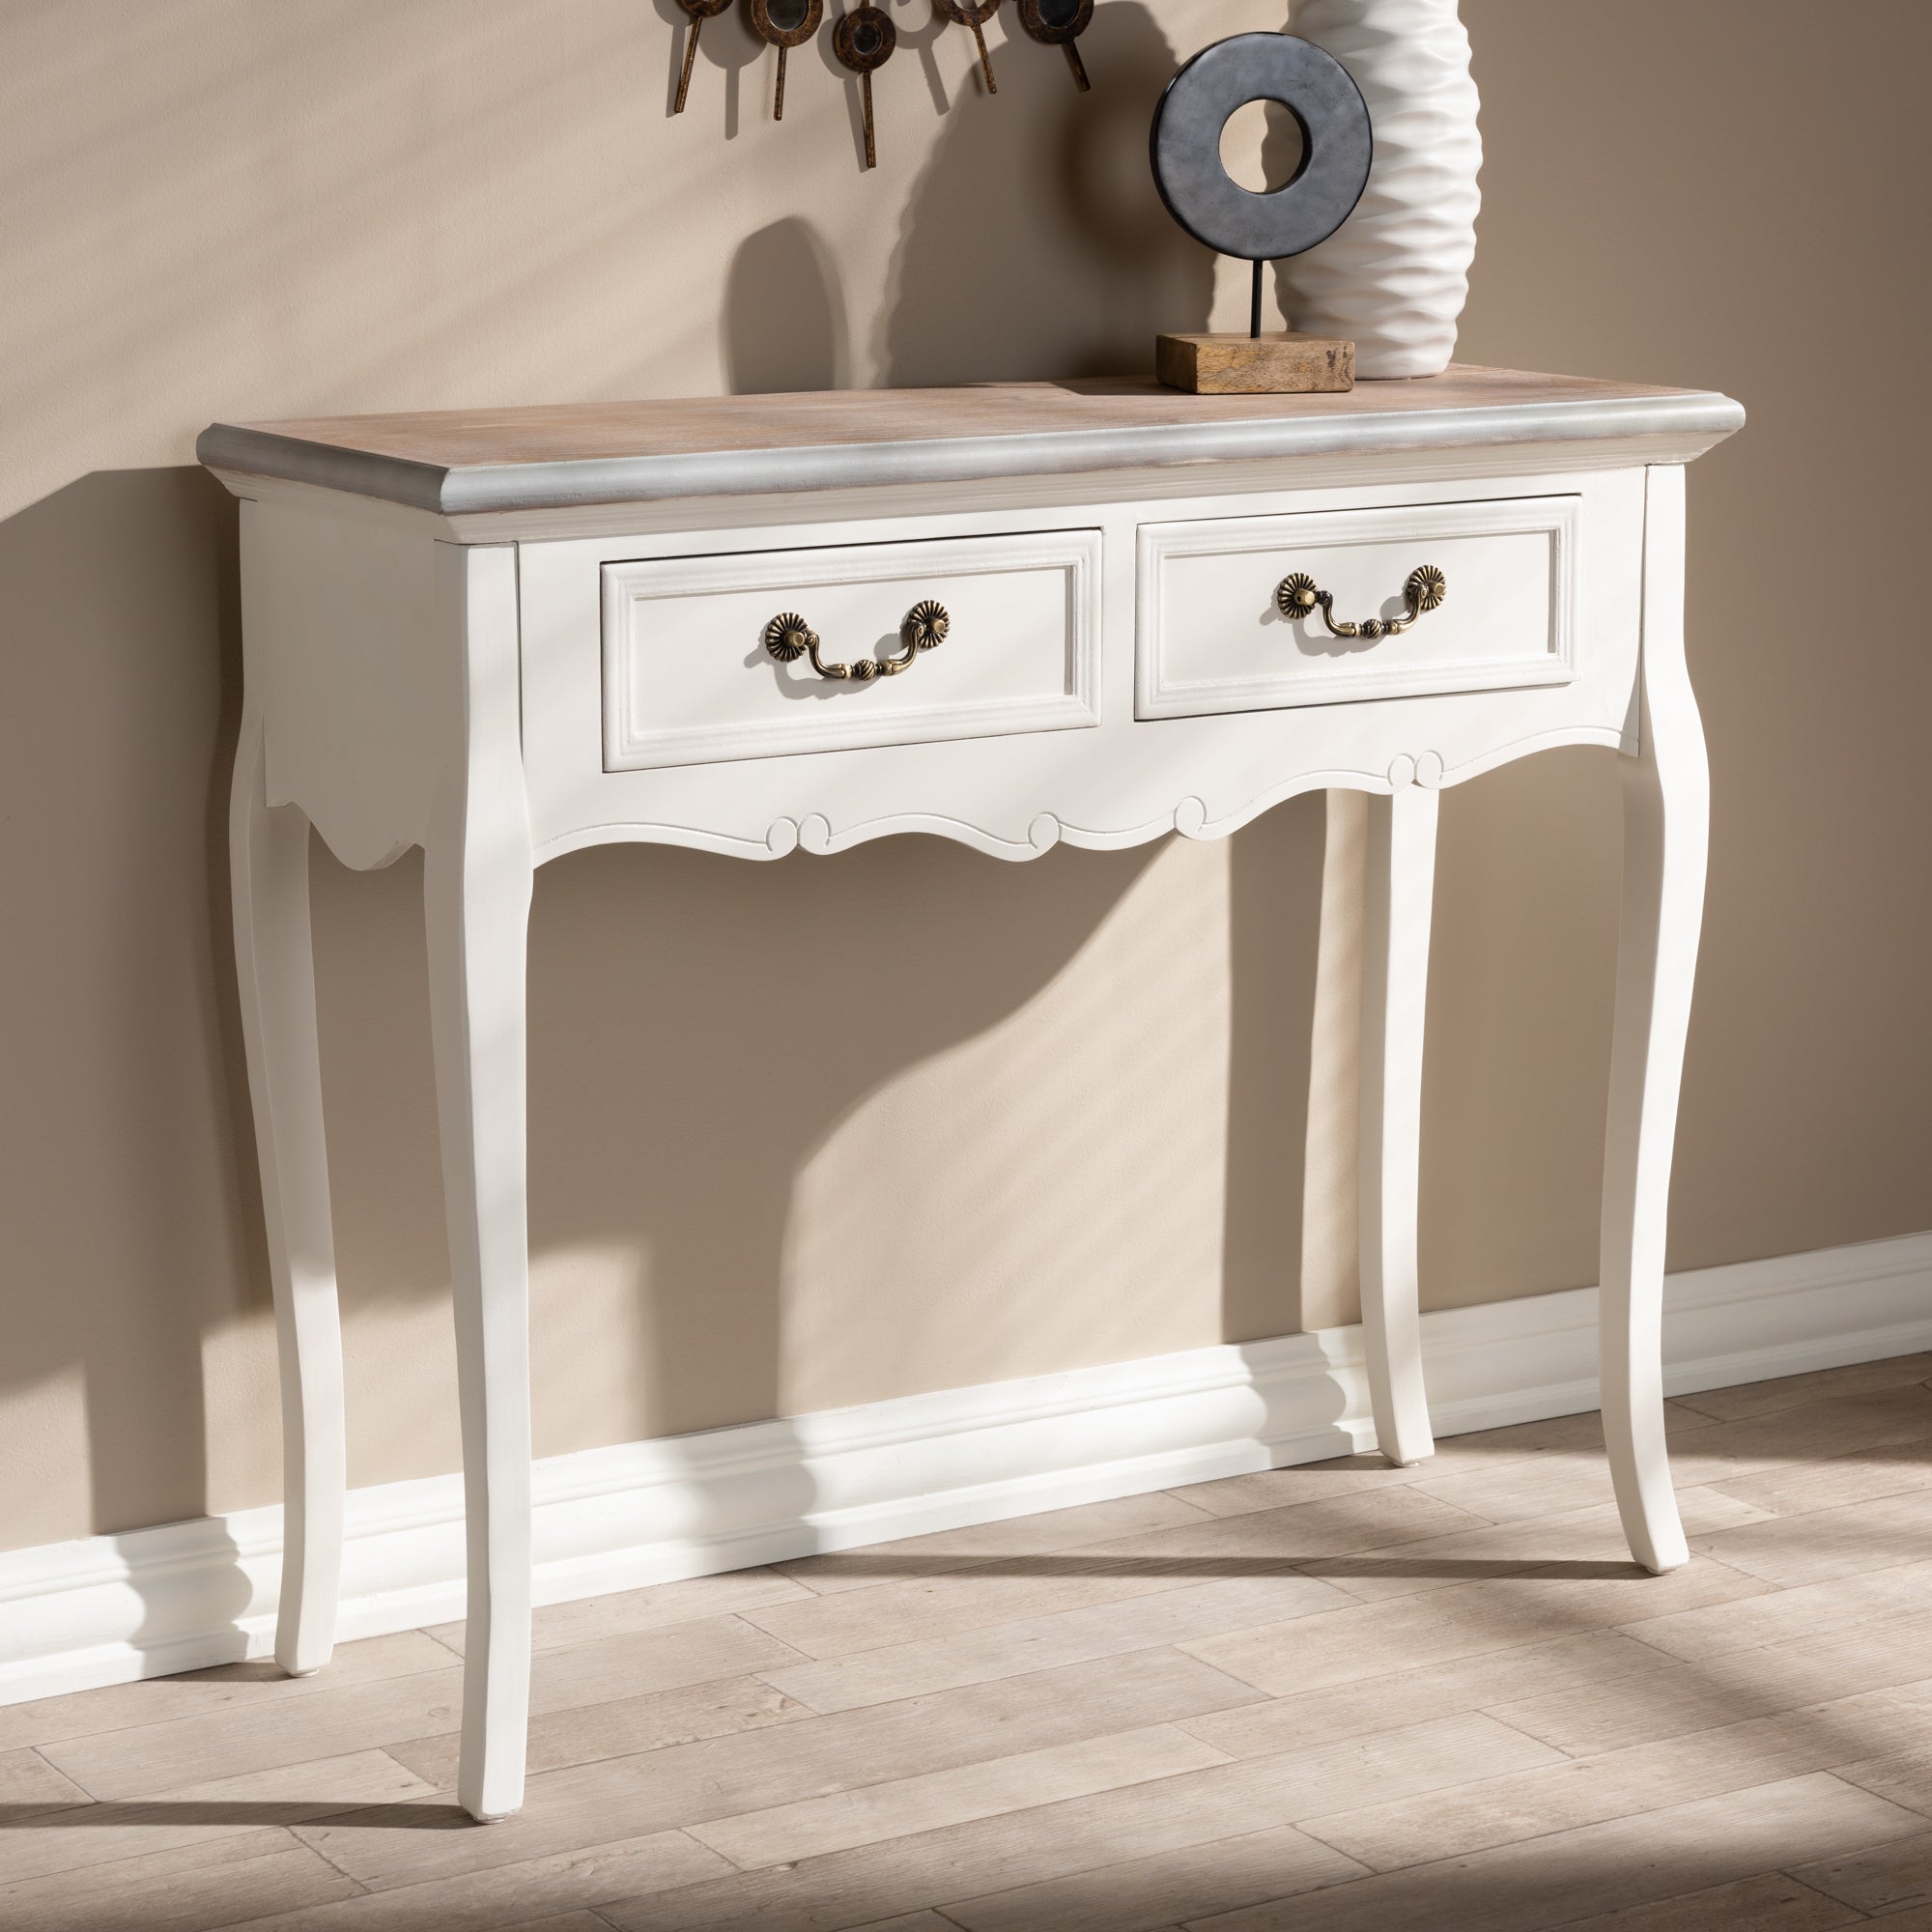 Capucine French Provincial Console Table 2-Drawer-Console Table-Baxton Studio - WI-Wall2Wall Furnishings